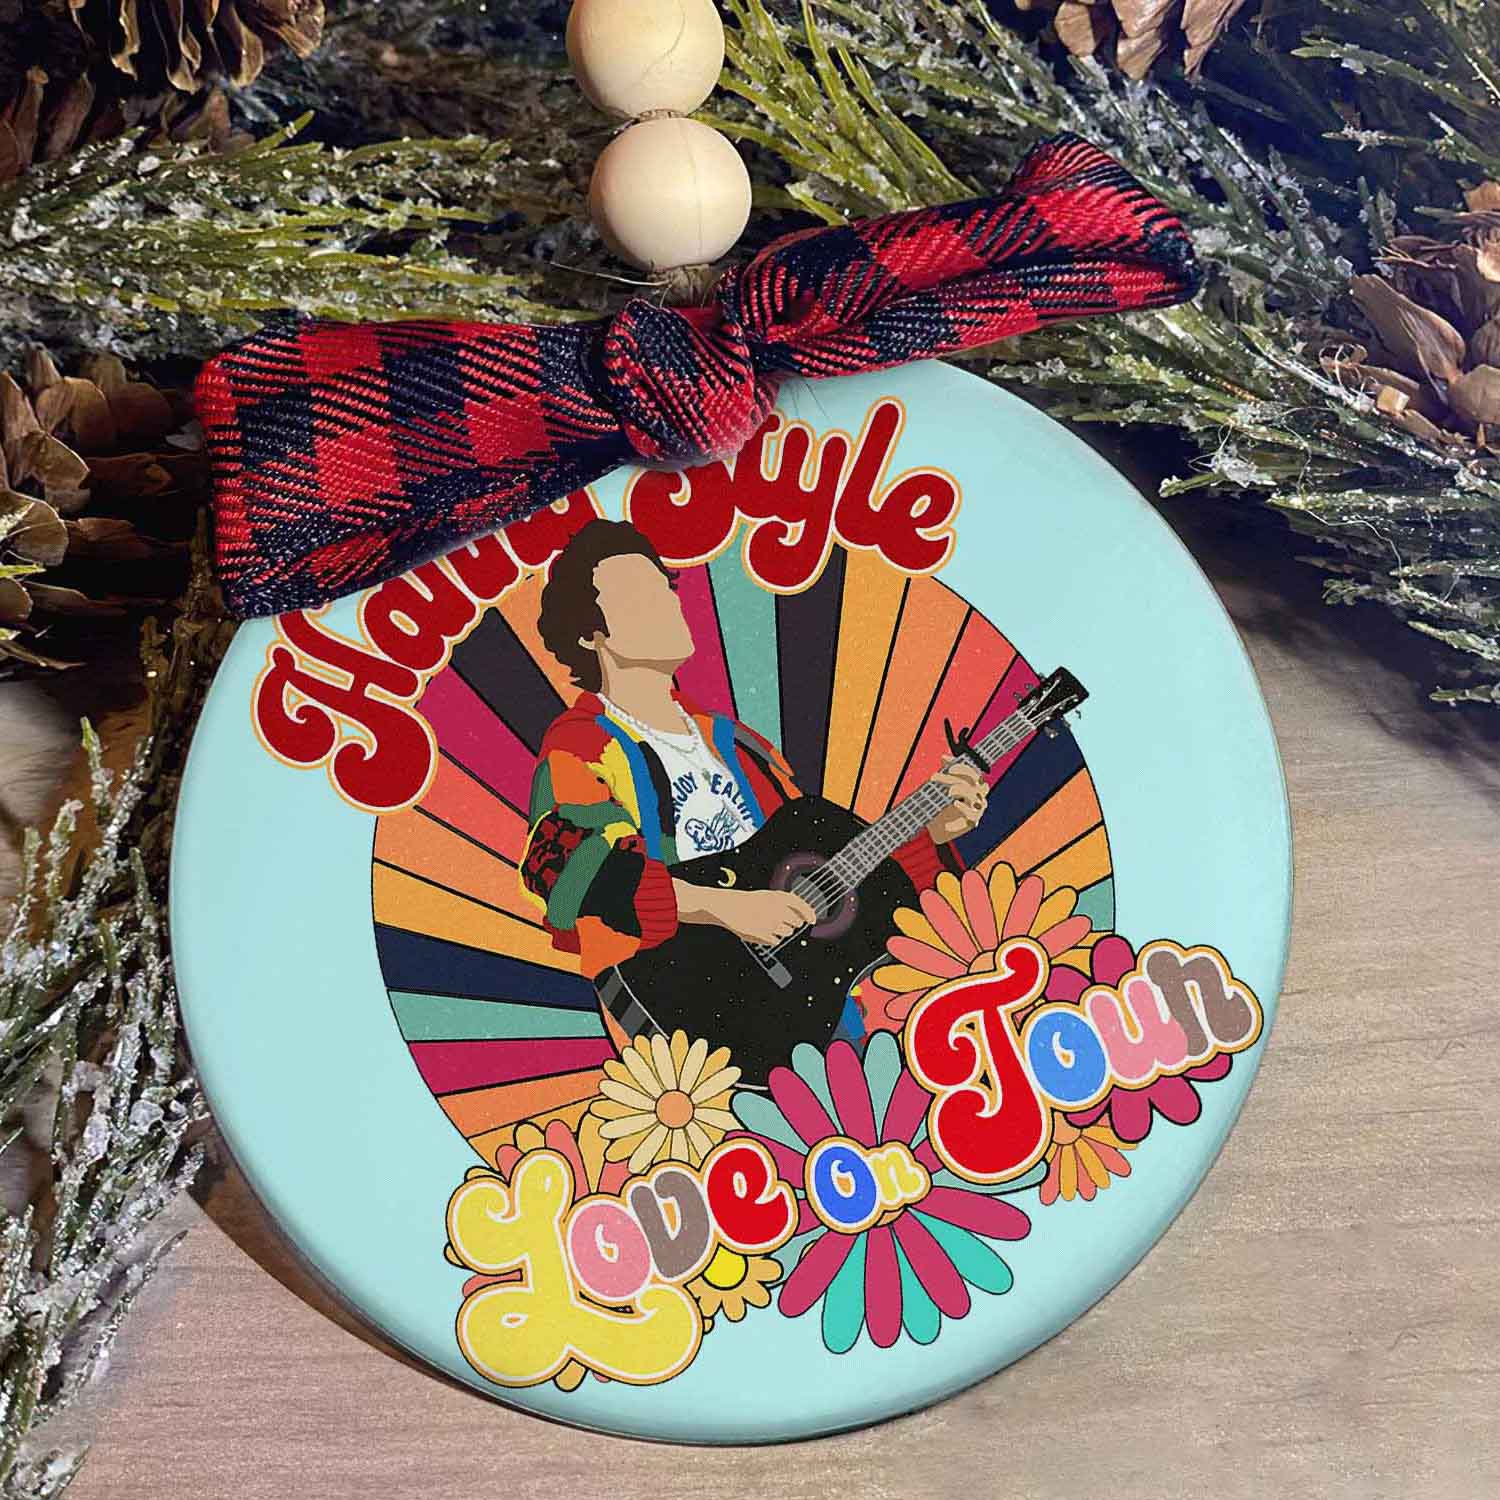 Harry Styles Gifts Love On Tour Christmas Ornament Xmas Tree Decor